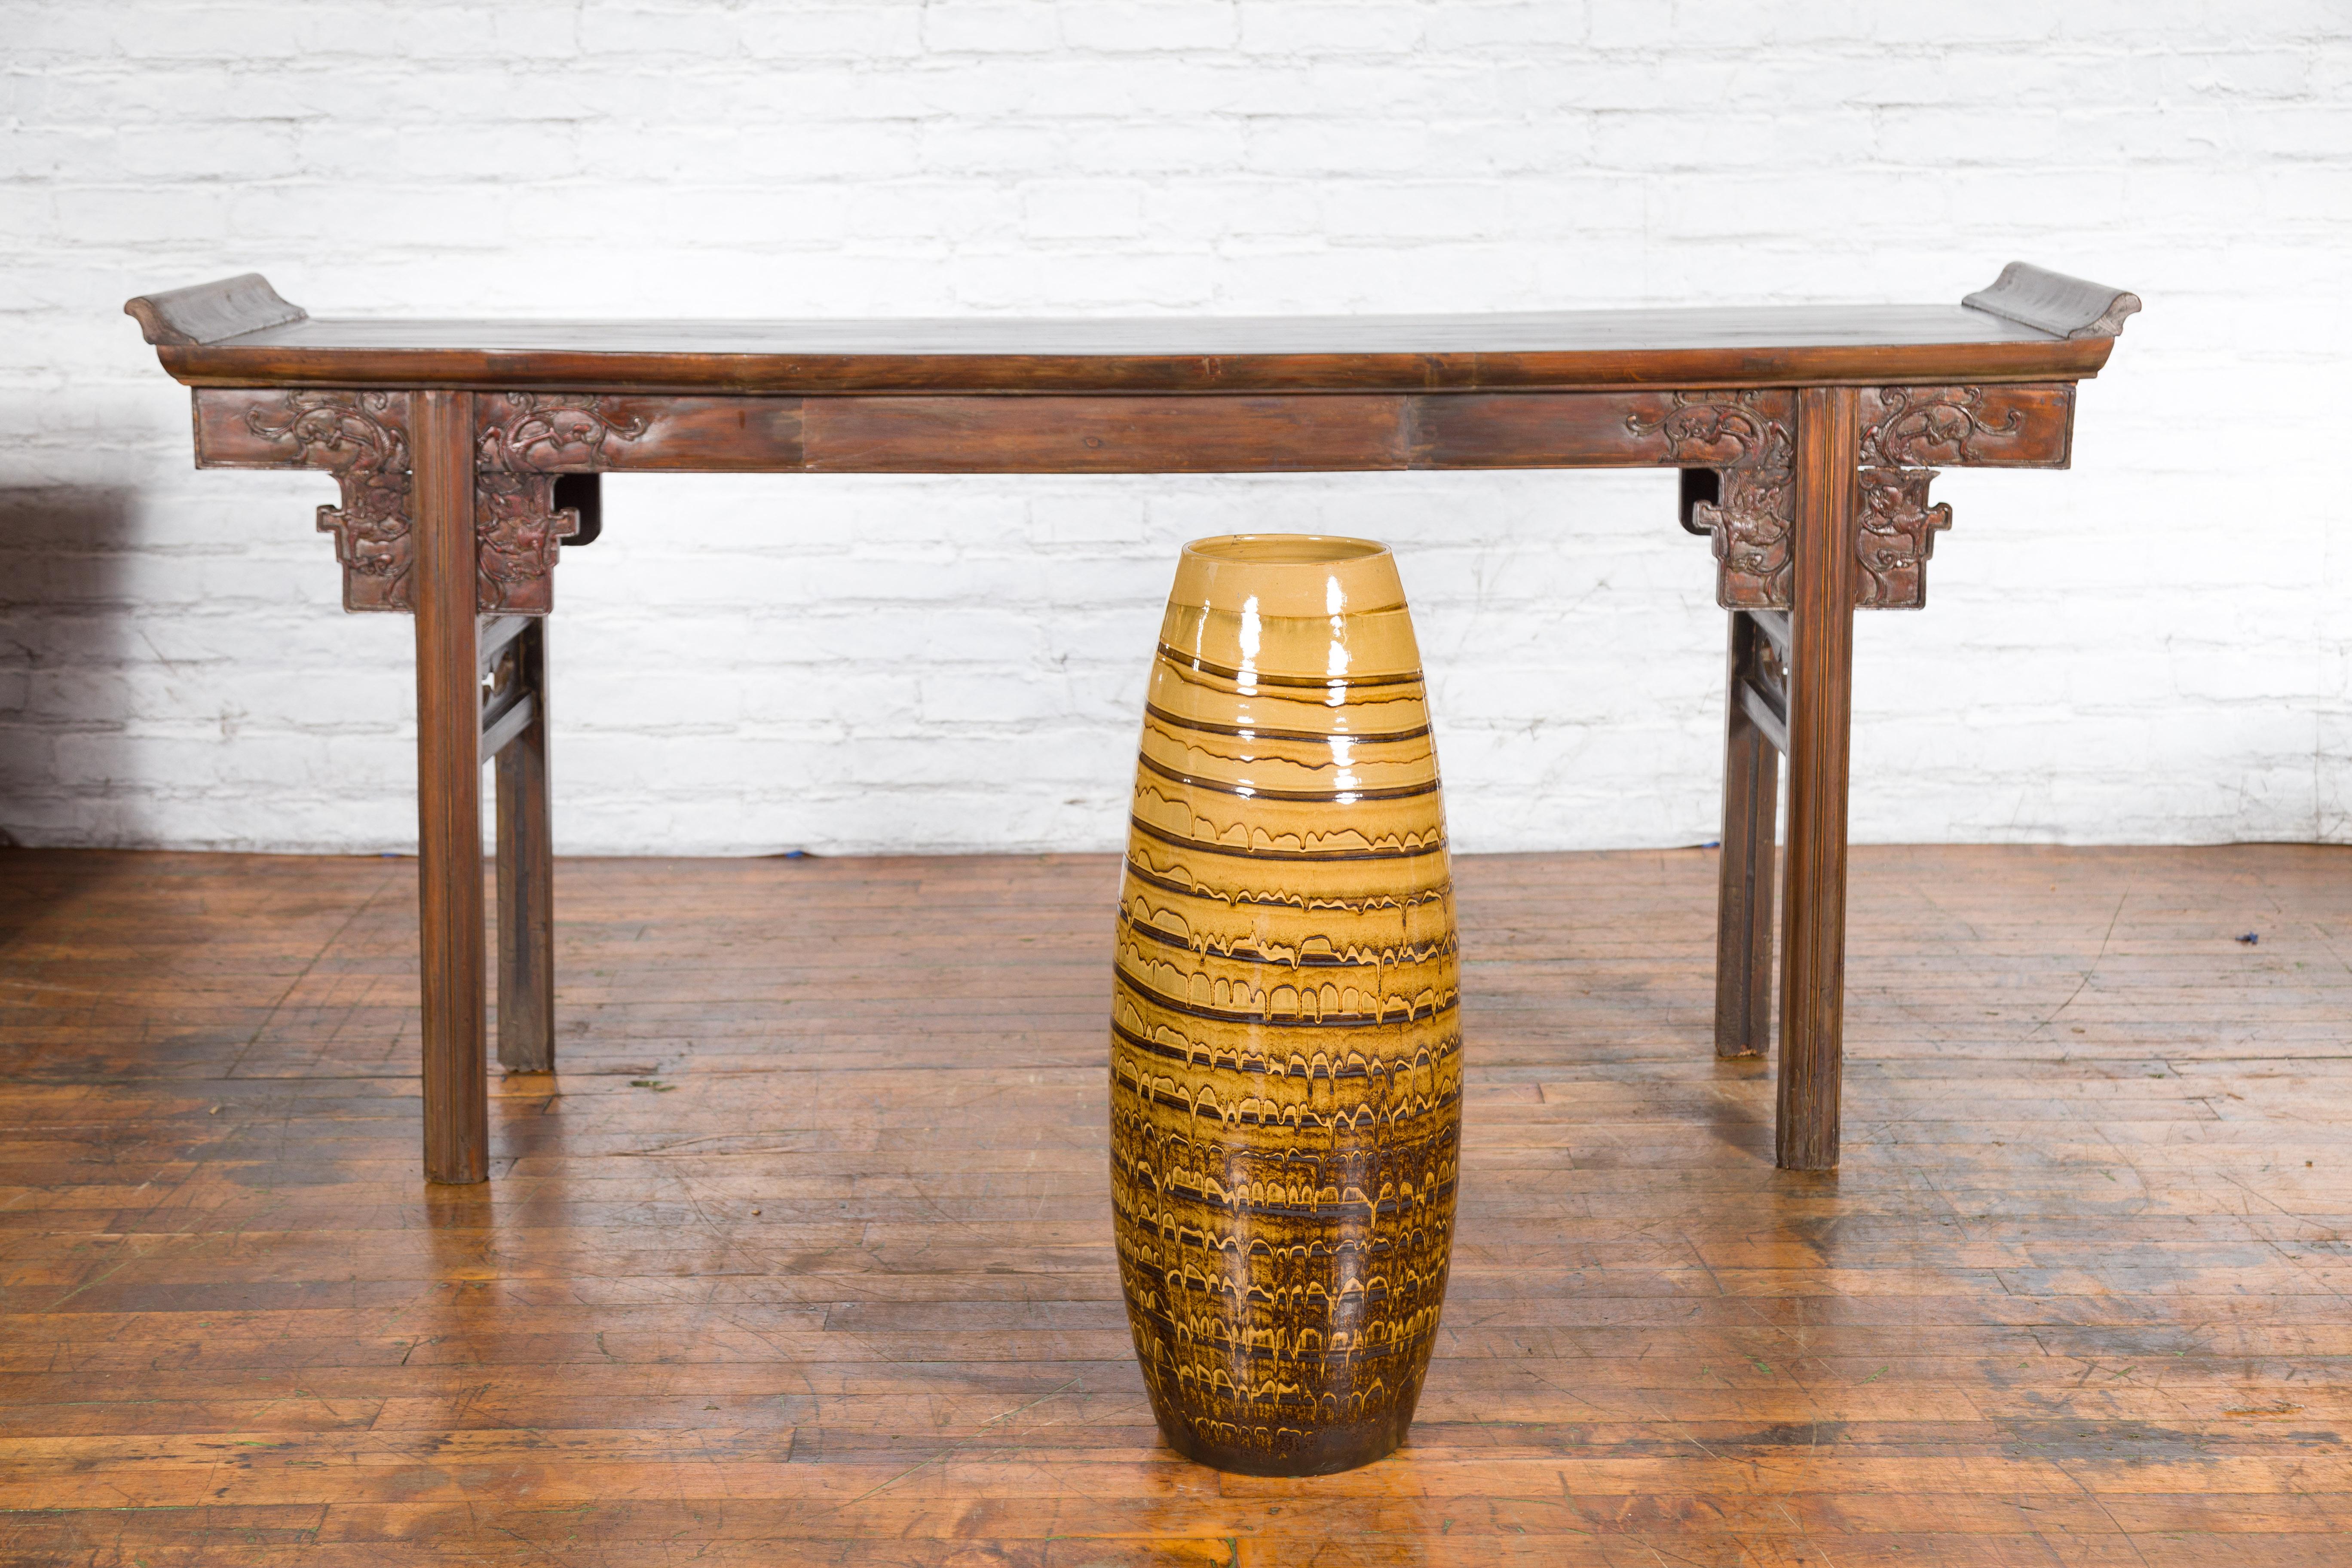 A contemporary Northern Thai ceramic vase from the Prem Collection, with dripping décor and slender silhouette. Charming our eyes with its pure lines and yellow and brown tones, this vase was born in Chiang Mai, northern Thailand. Showcasing an